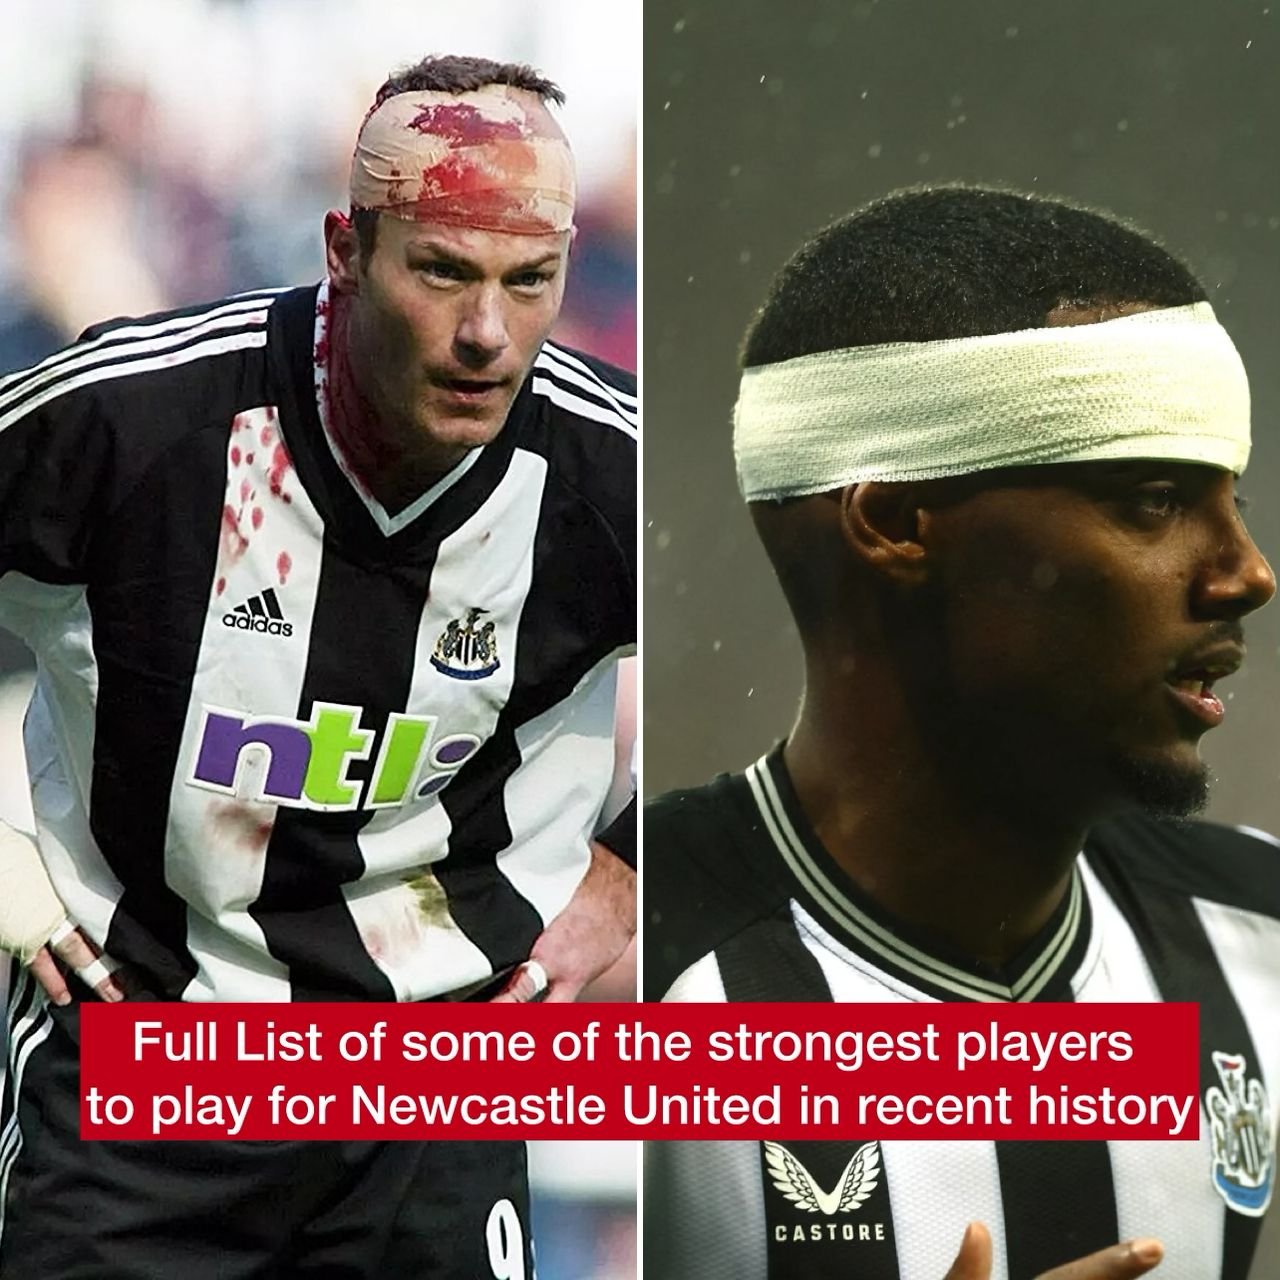 Full List of some of the strongest players to play for Newcastle United in recent history